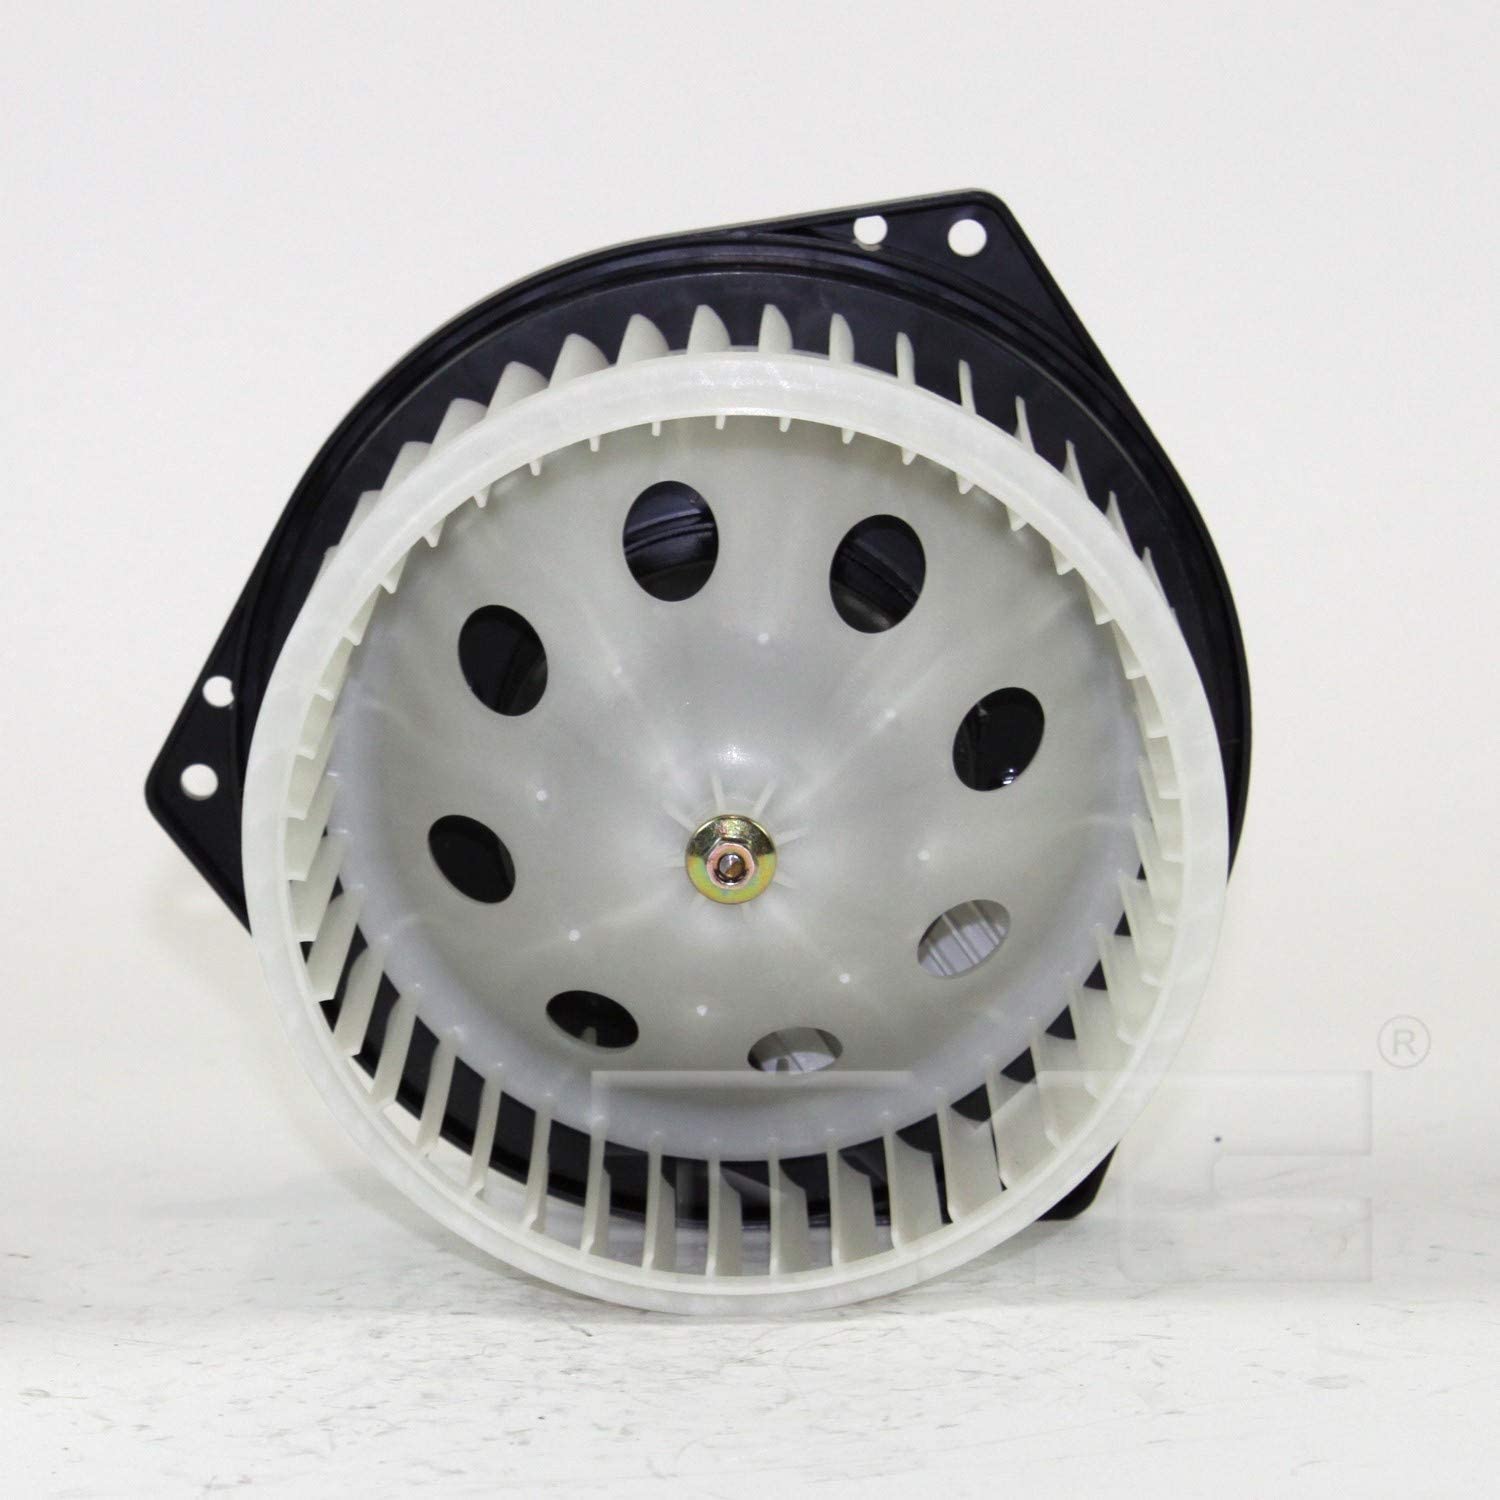 TYC - Front HVAC Blower Motor For 2012 Nissan 370Z - Premium Quanlity With One Year Warranty